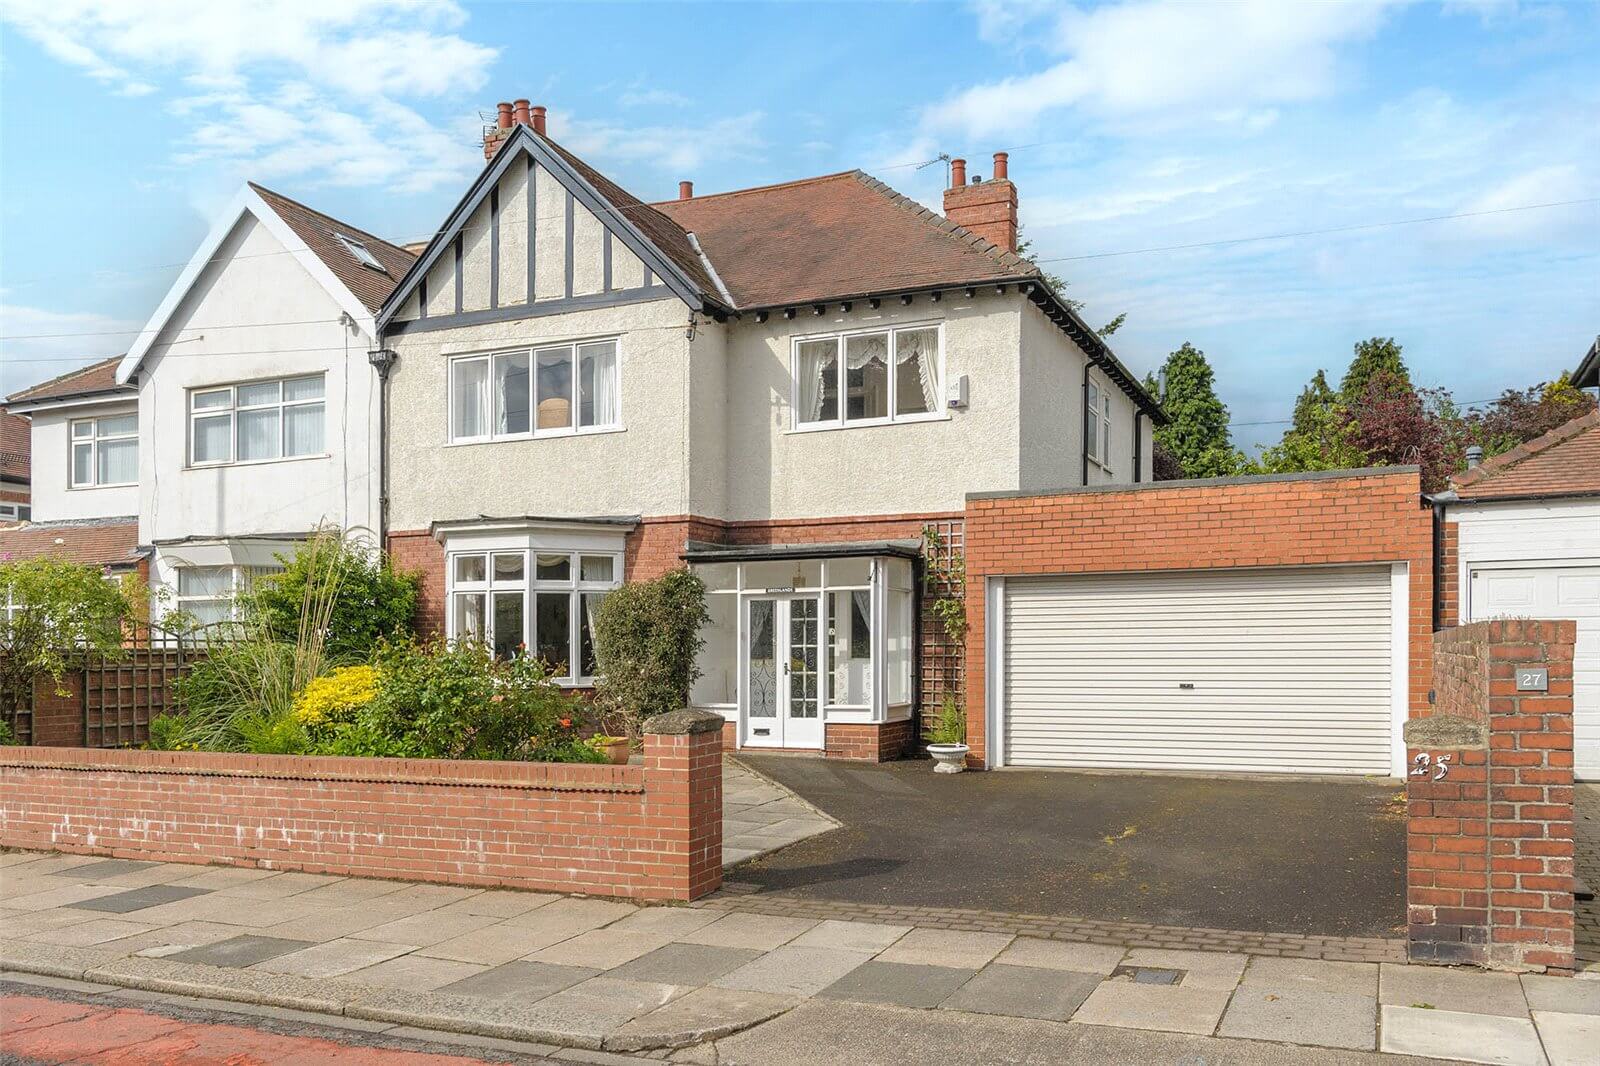 4 Bedroom House for Sale in Gosforth